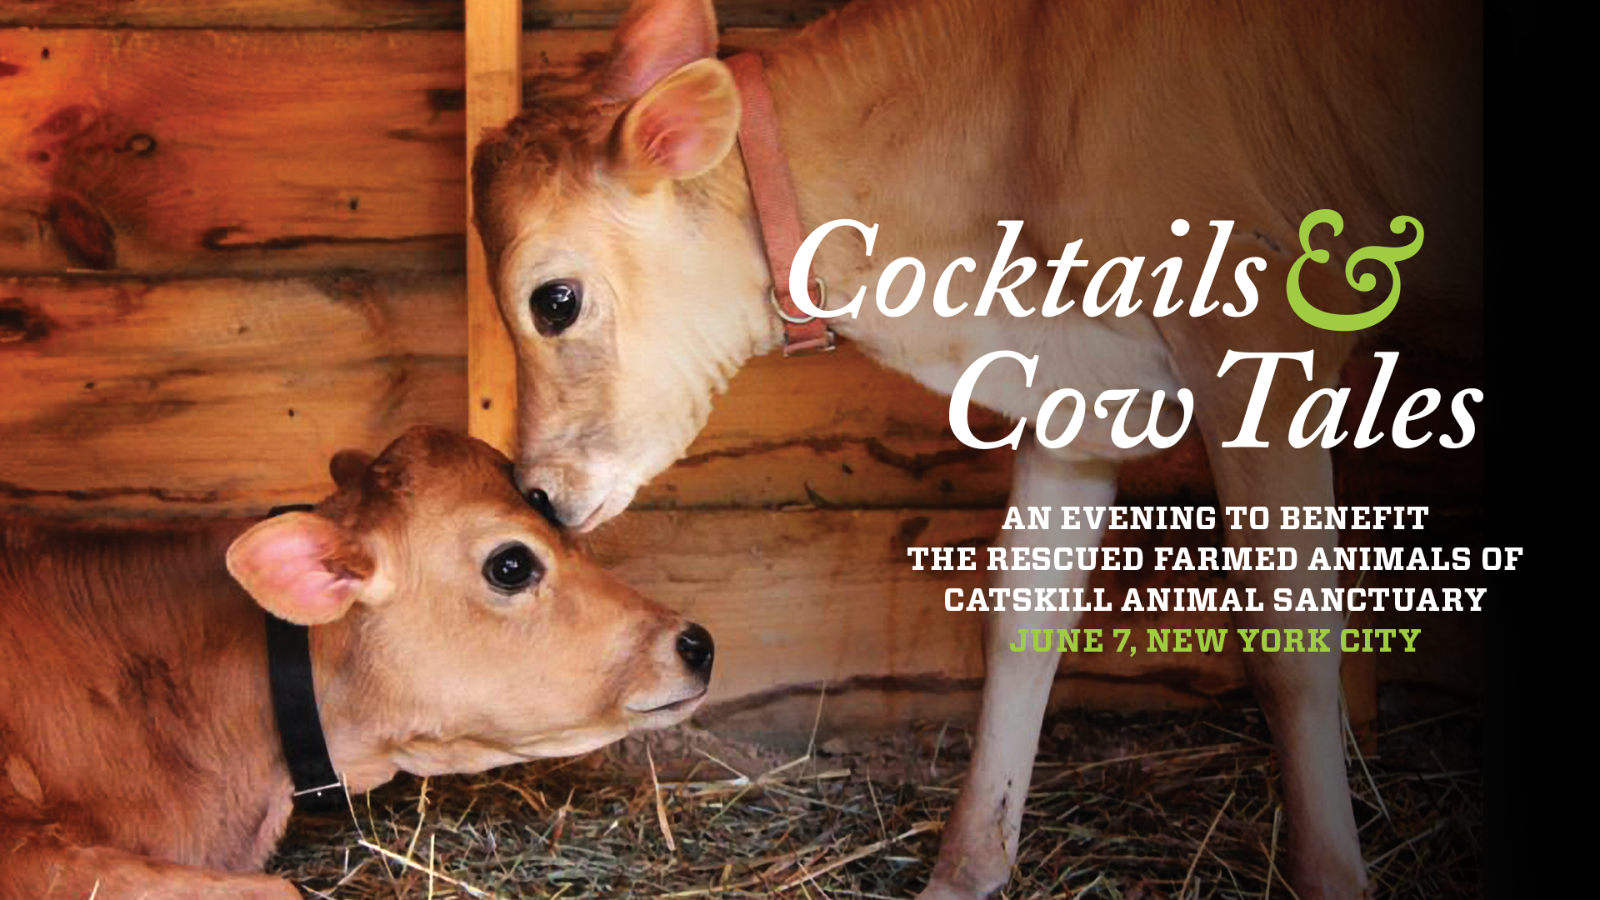 Cocktails & Cow Tales